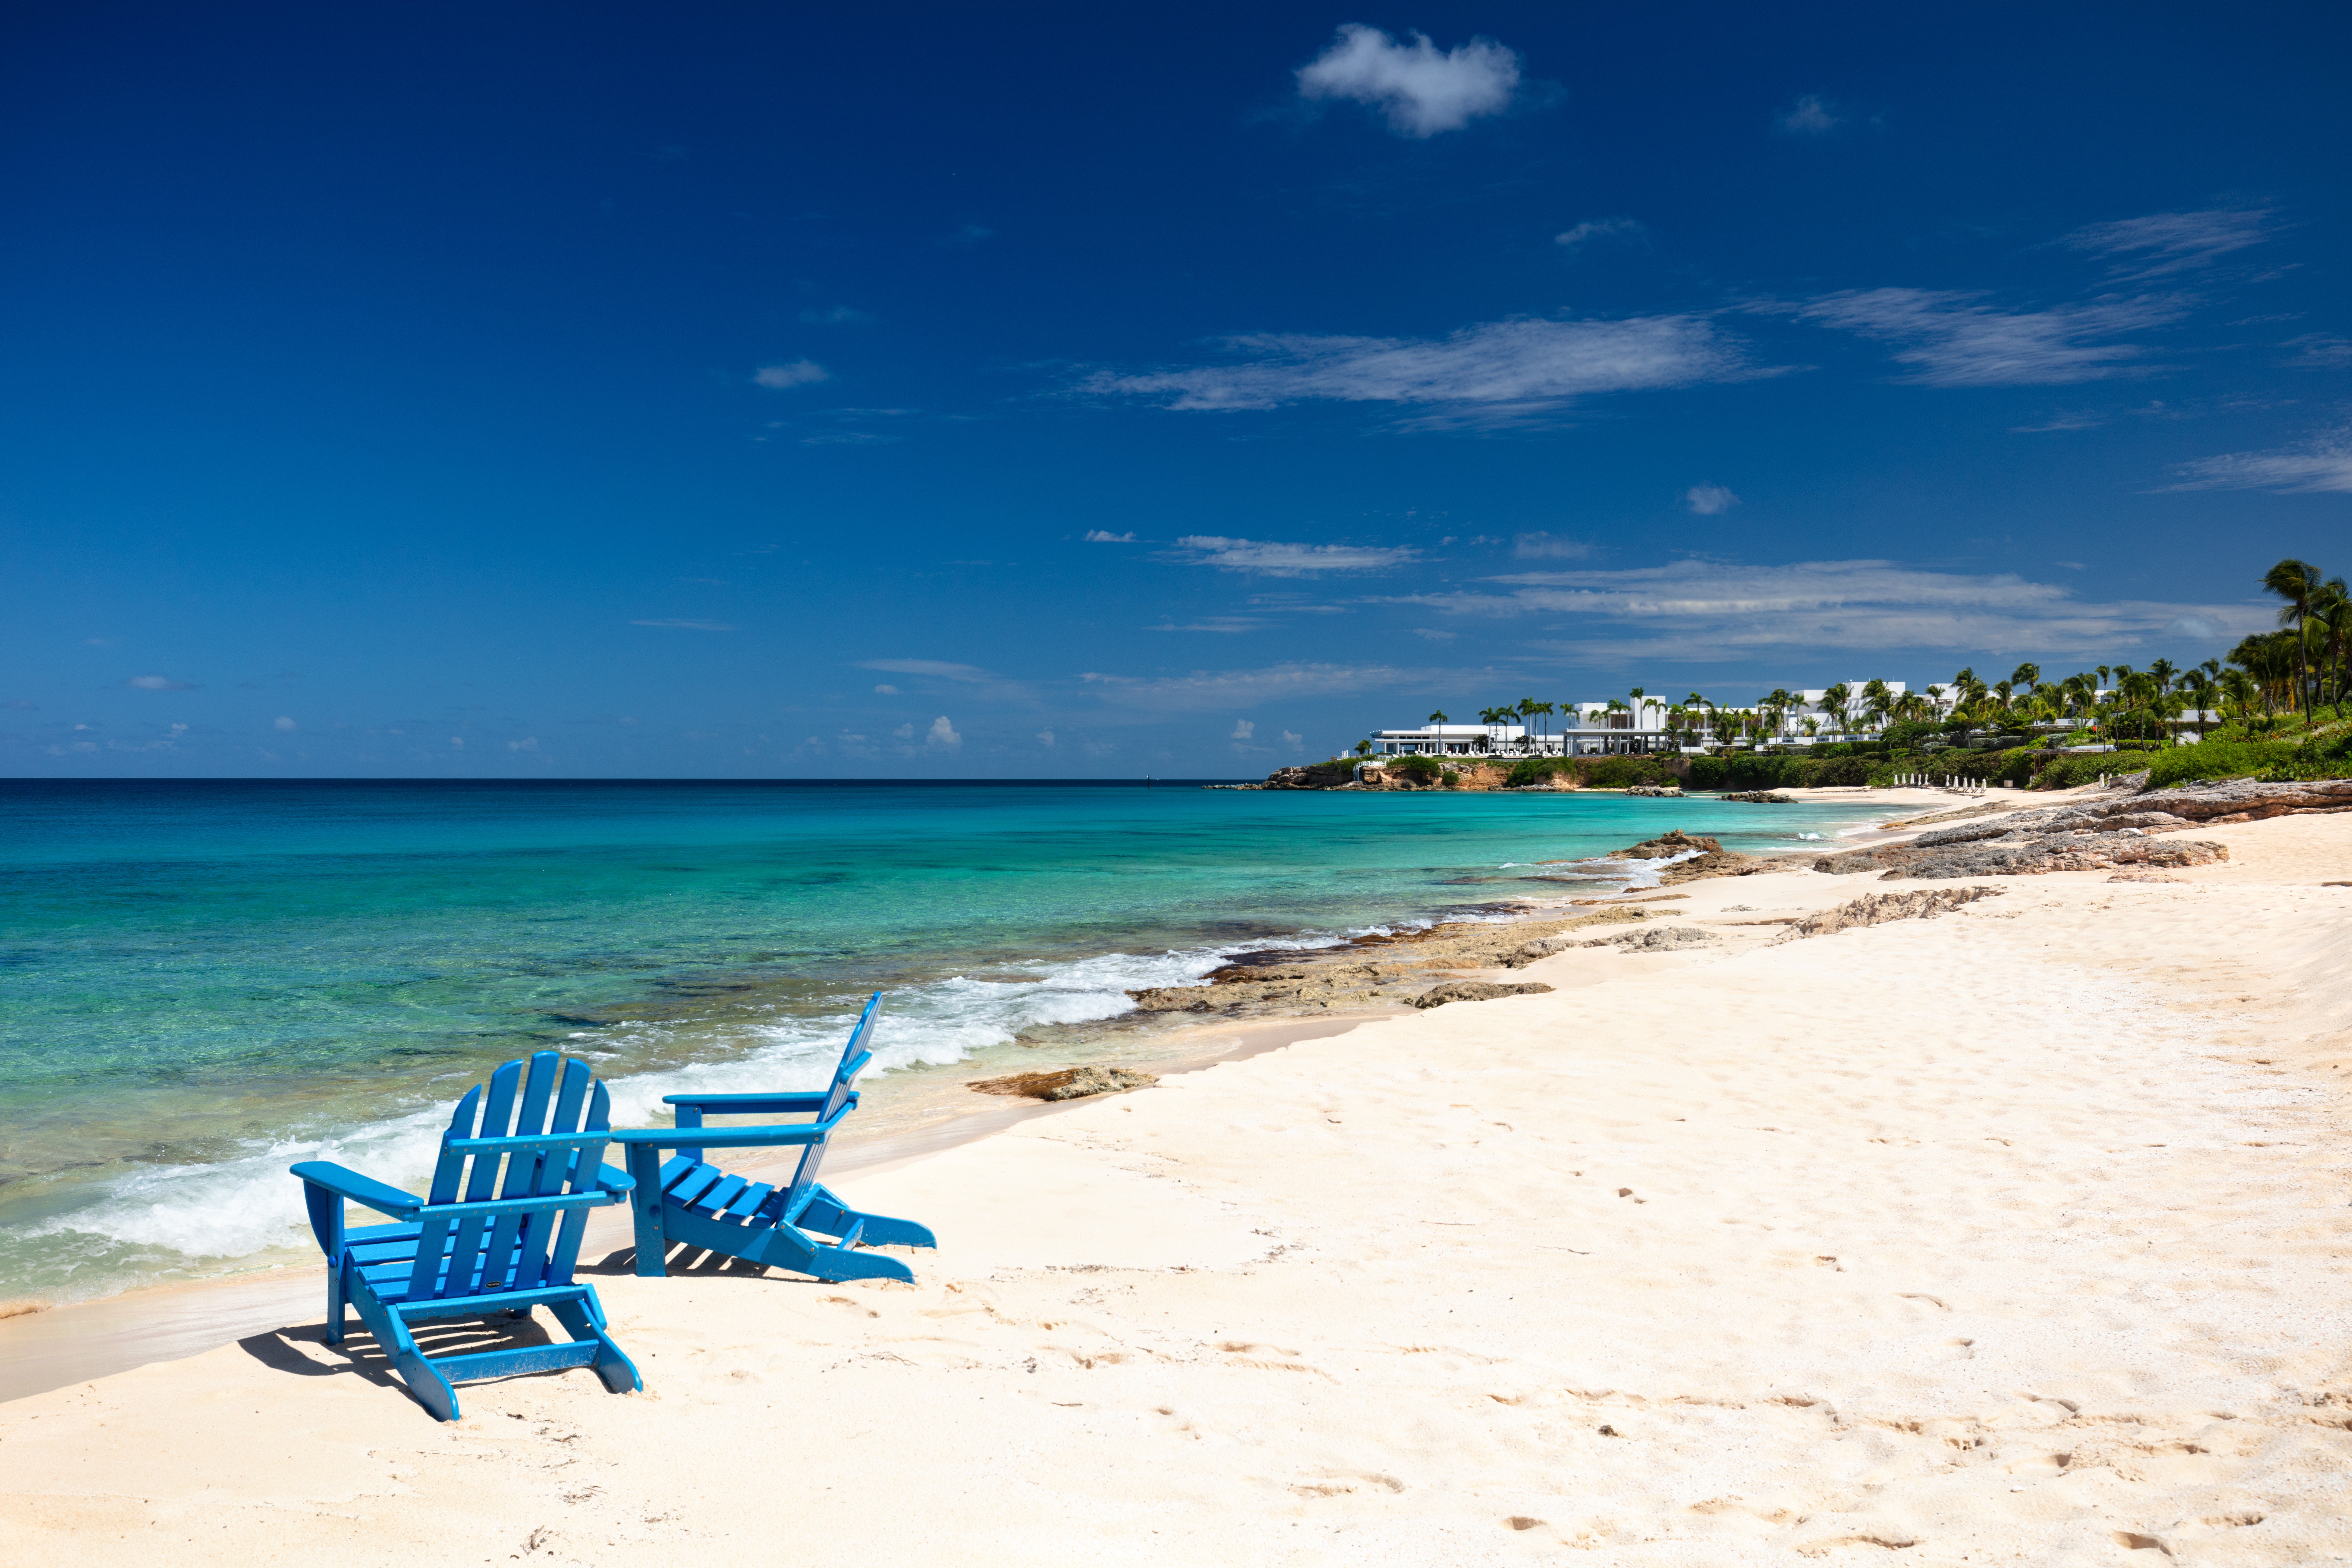 Relax in a deck chair on Meads Bay Beach, Anguilla